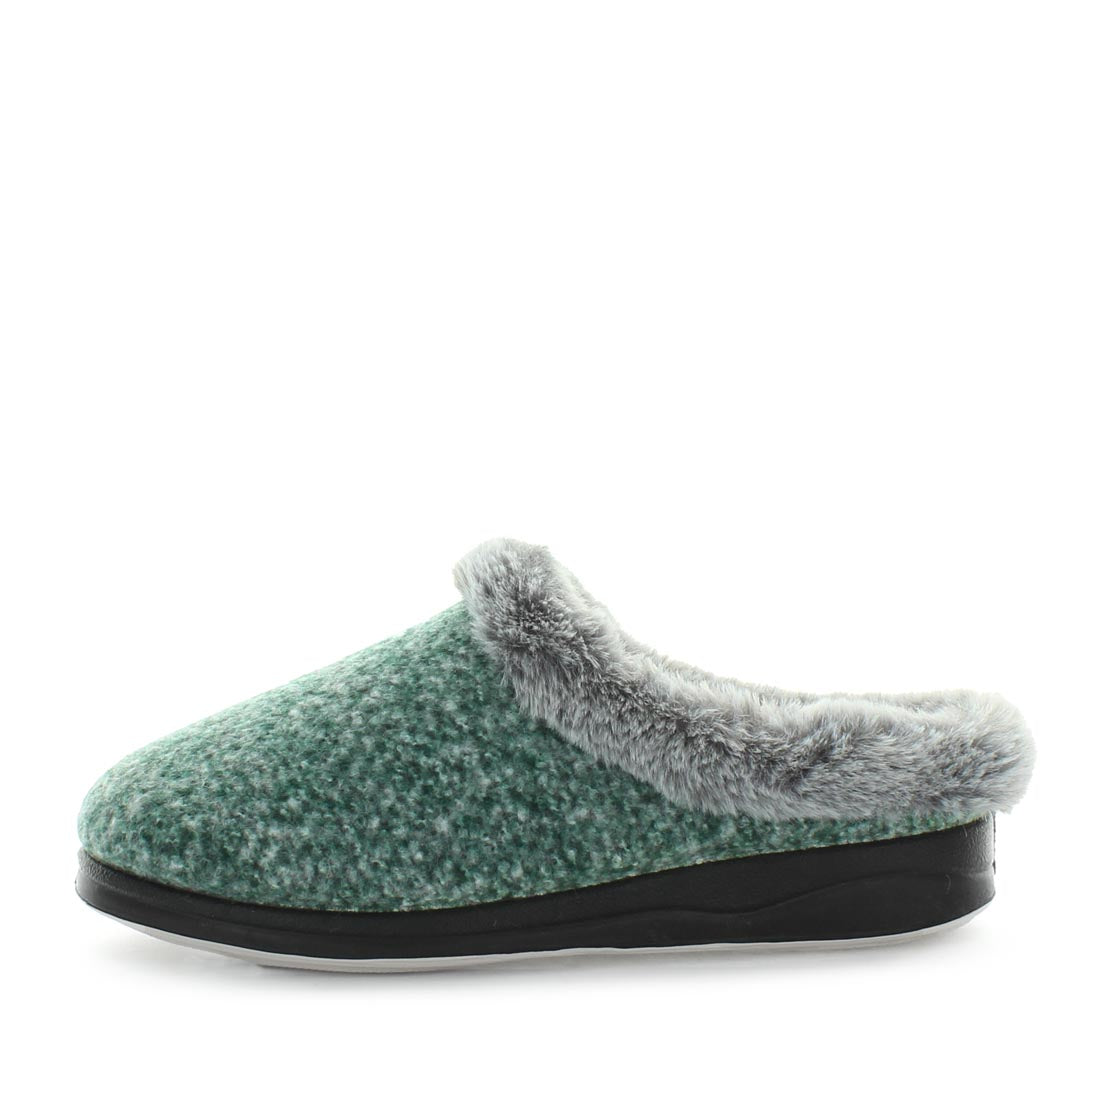 womens slippers - Endy slipper, by panda Slippers. A scuff style slipper with a micro-terry design for warmth and an extra comfy fit with anon slip sole - comfort womens slippers